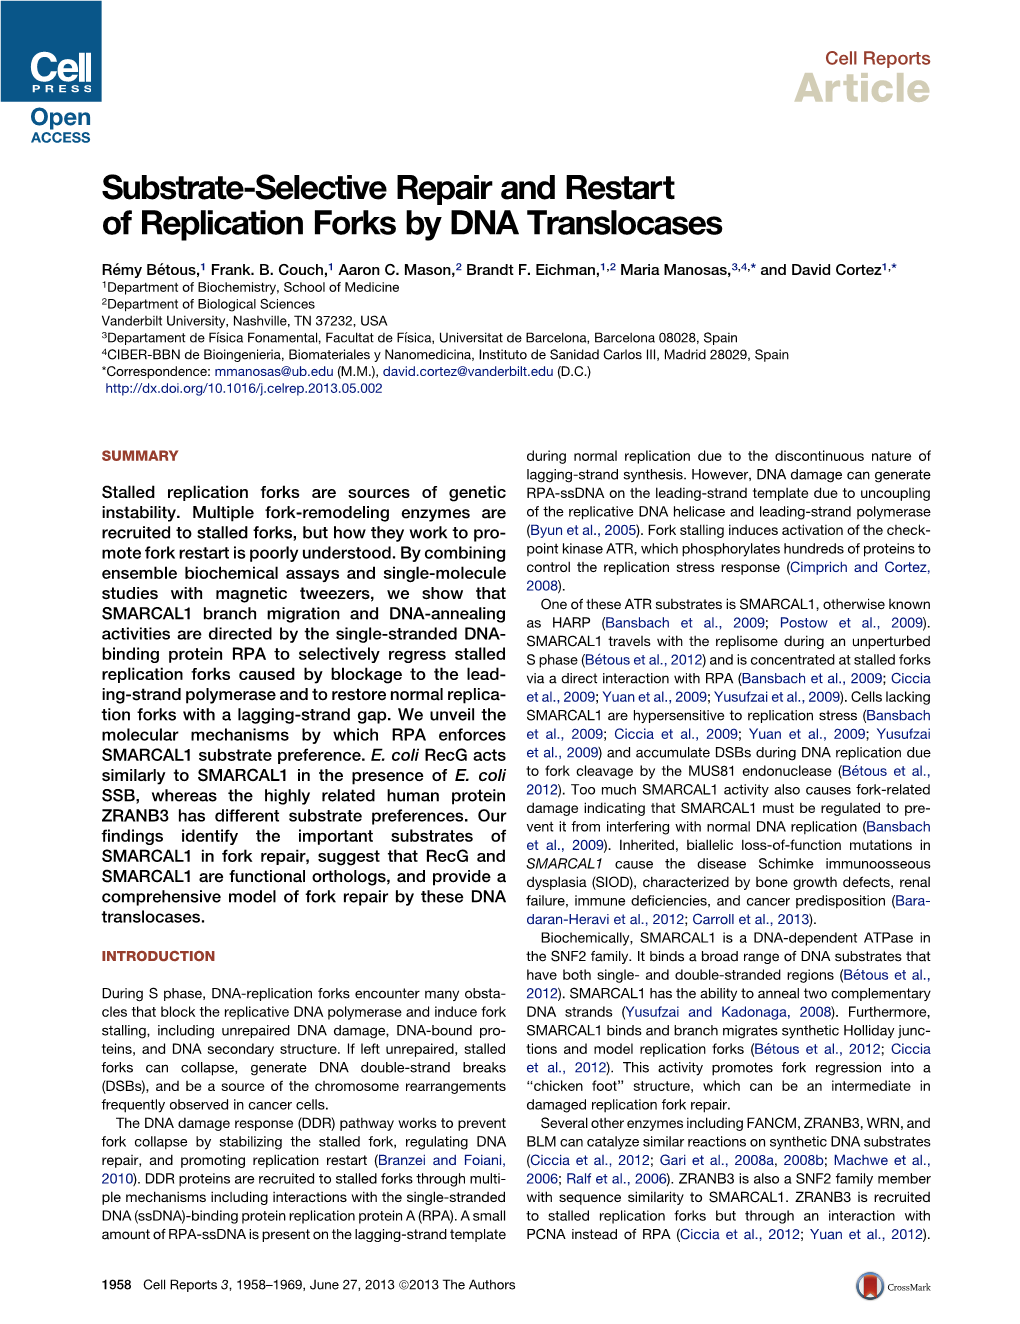 Substrate-Selective Repair and Restart of Replication Forks by DNA Translocases